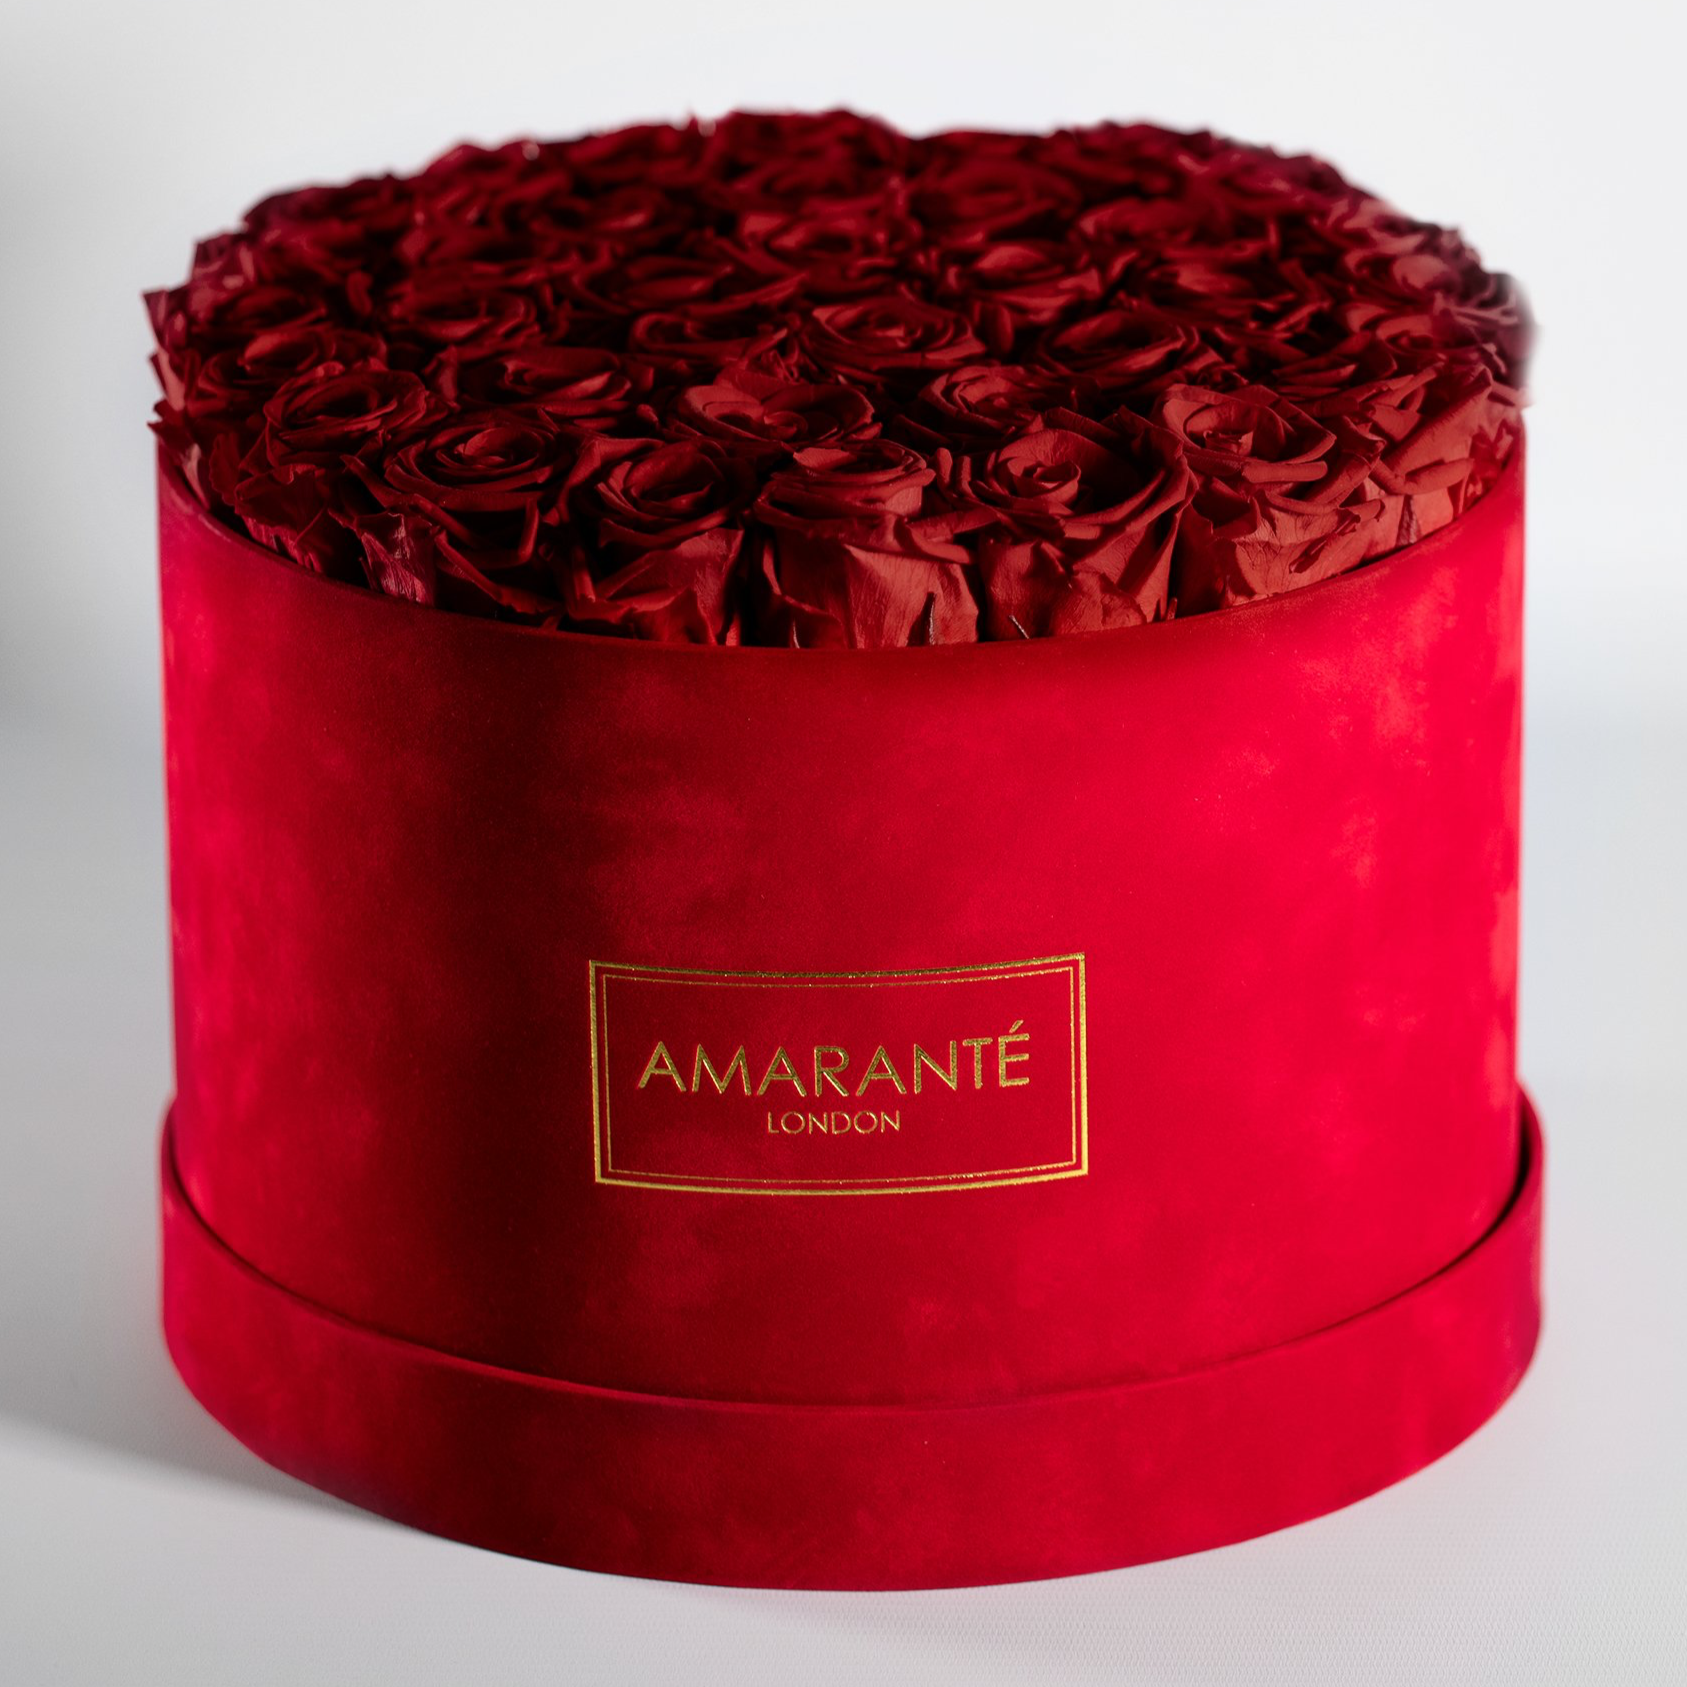 Divine Red Roses in an eye catching red circular box in extra large size. 